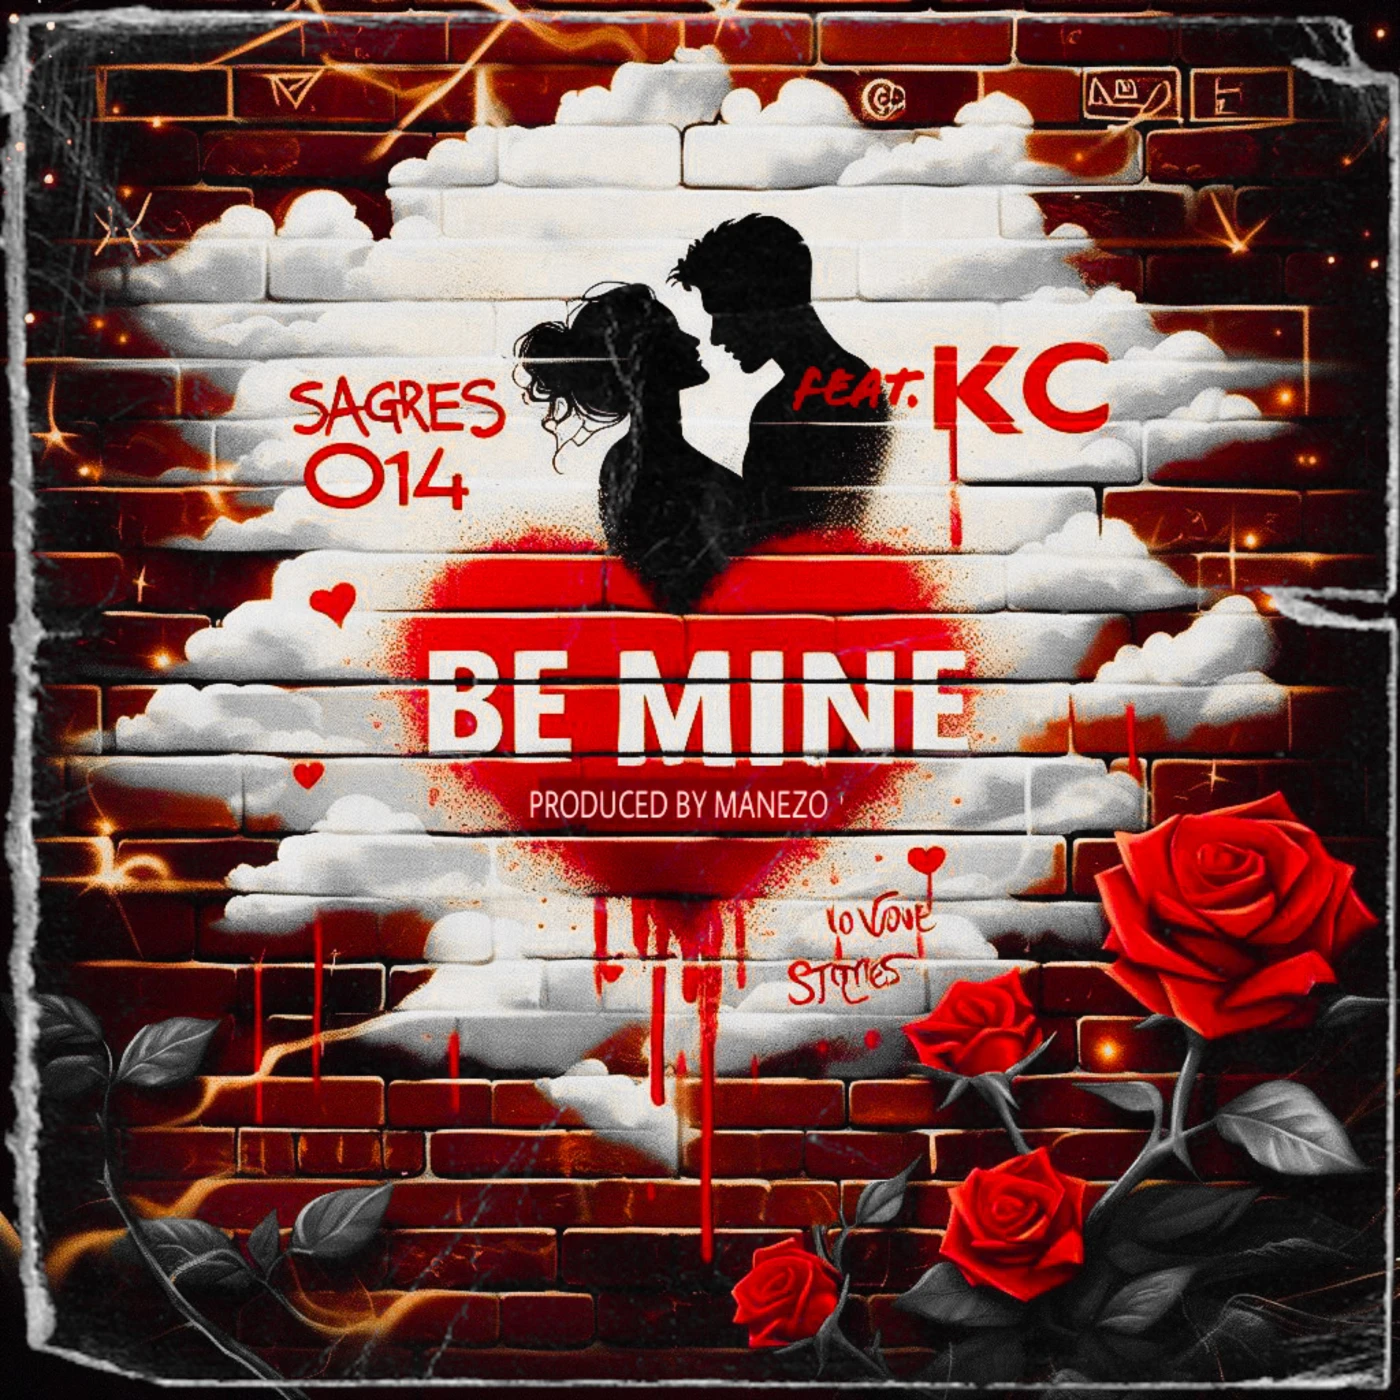 be-mine-feat-kc-sagres-014-Just Malawi Music